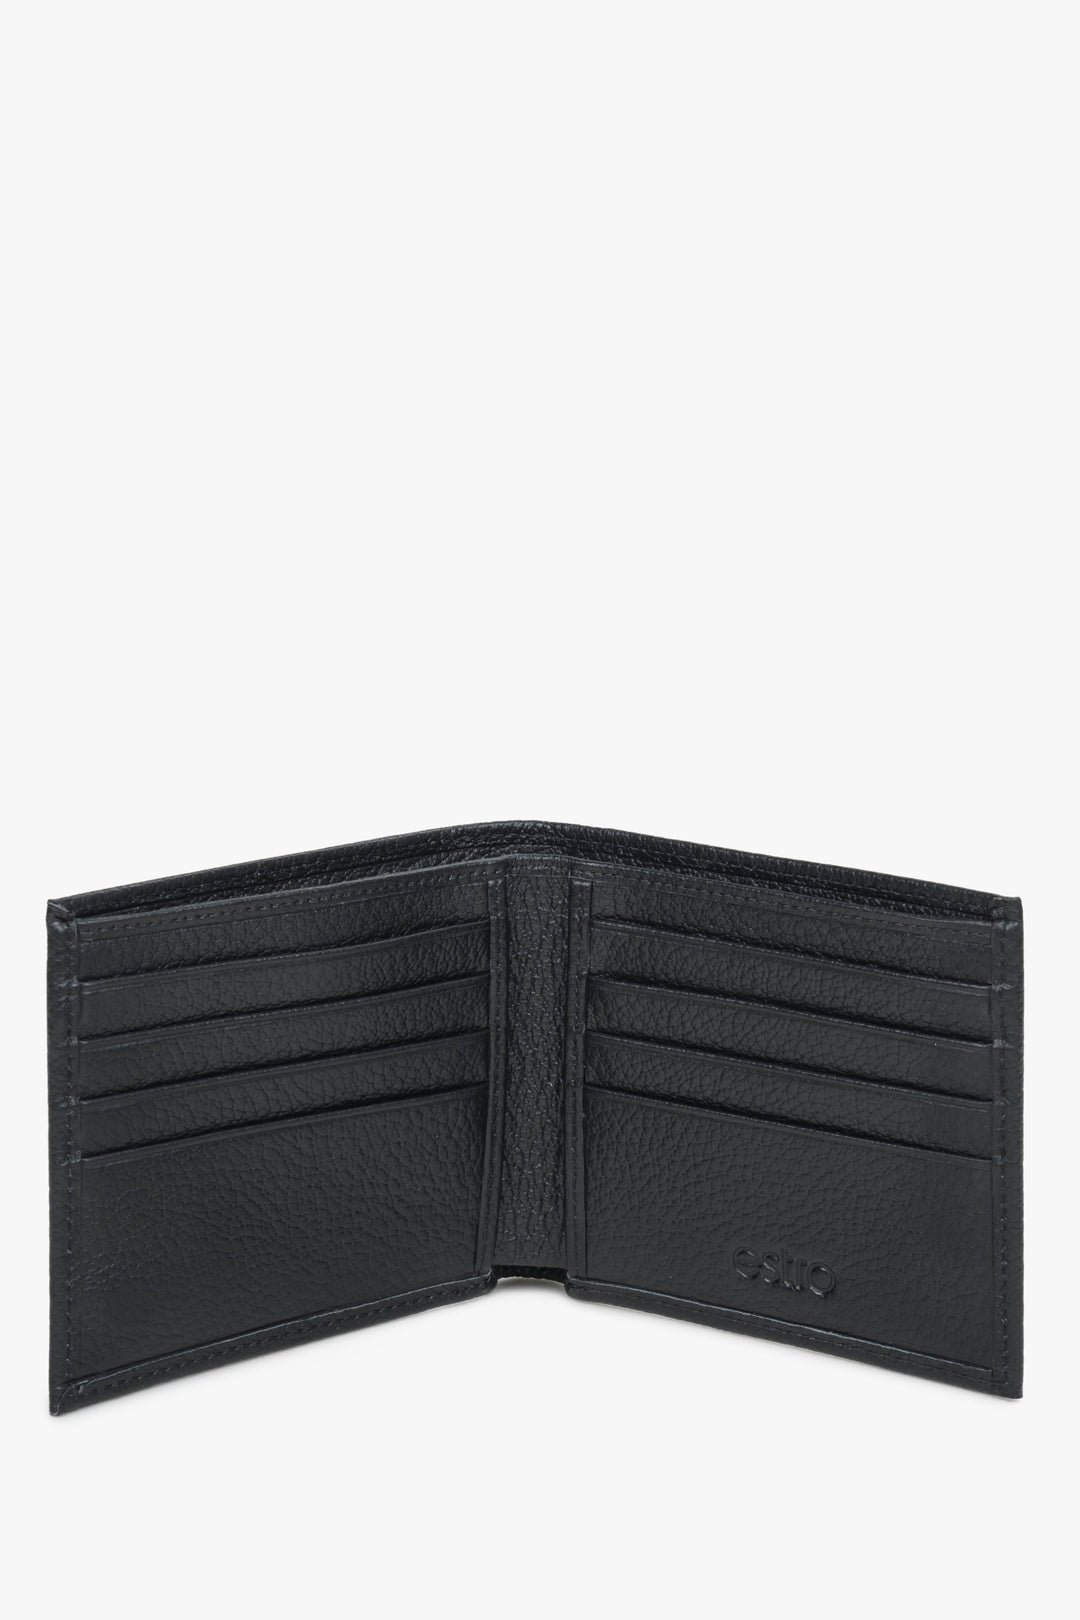 Black leather compact men's wallet - presentation of the interior model.